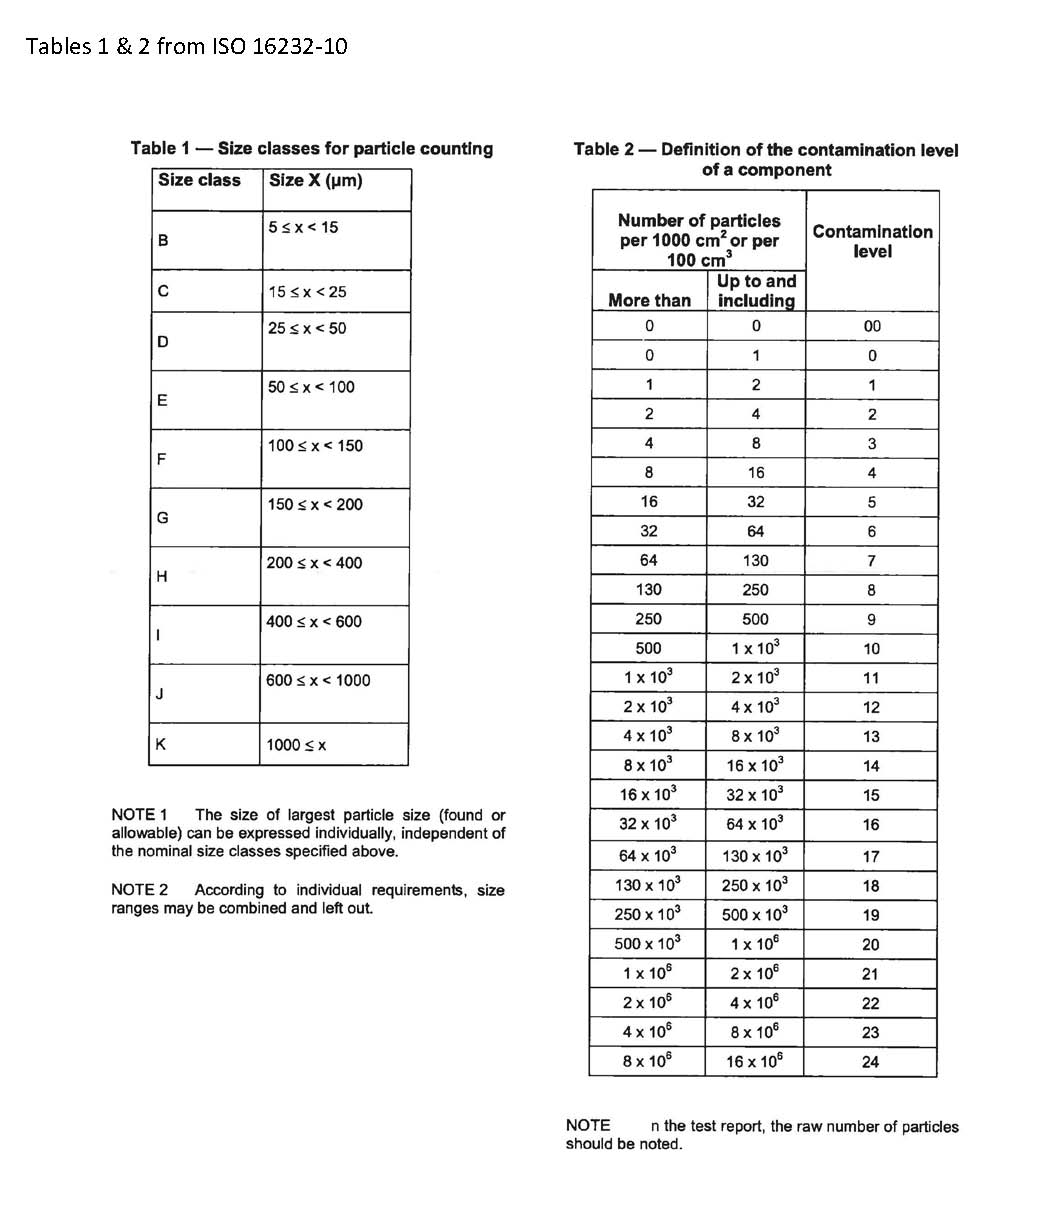 ISO 16232-10 Tables 1 and 2.jpg